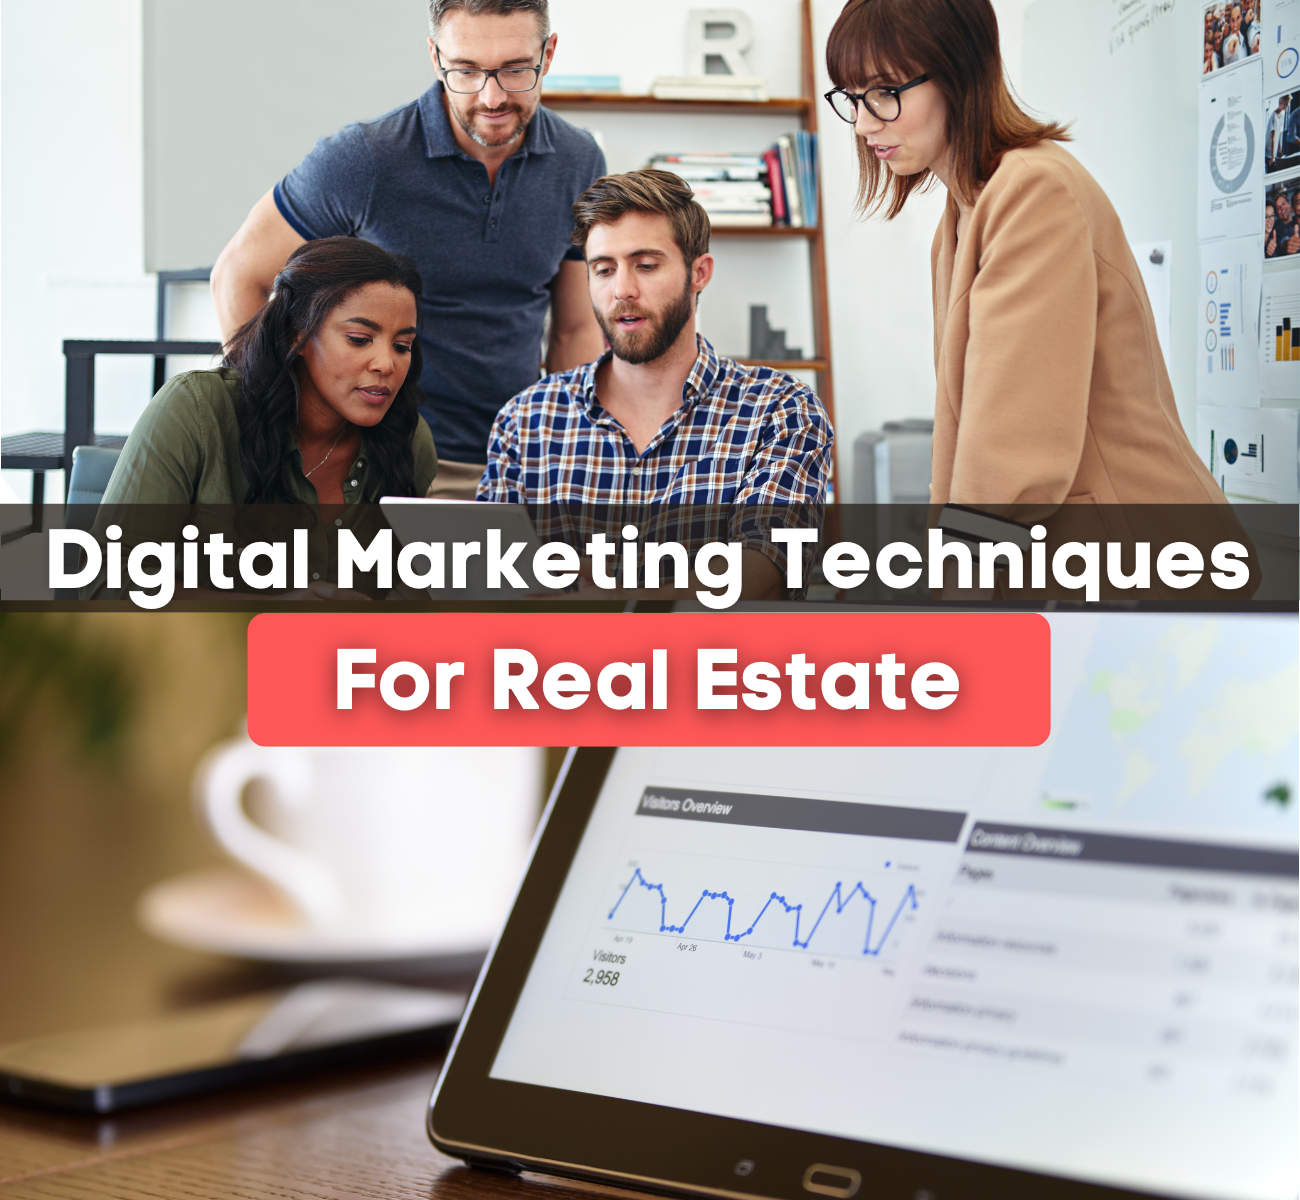 Digital Marketing Techniques For Real Estate